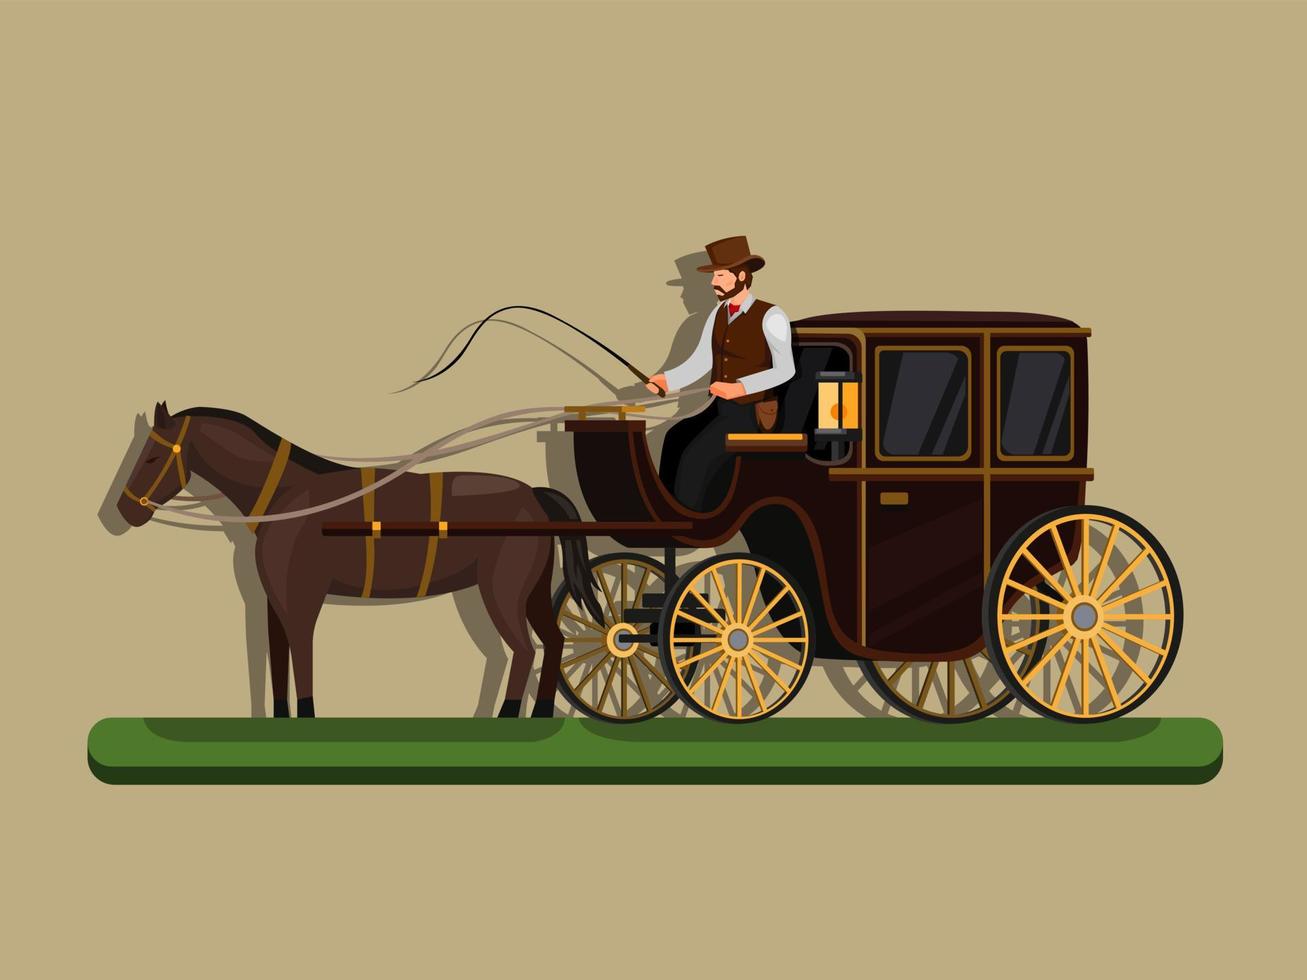 Horse drawin carriage. classic transportation powered by horse concept in cartoon illustration vector